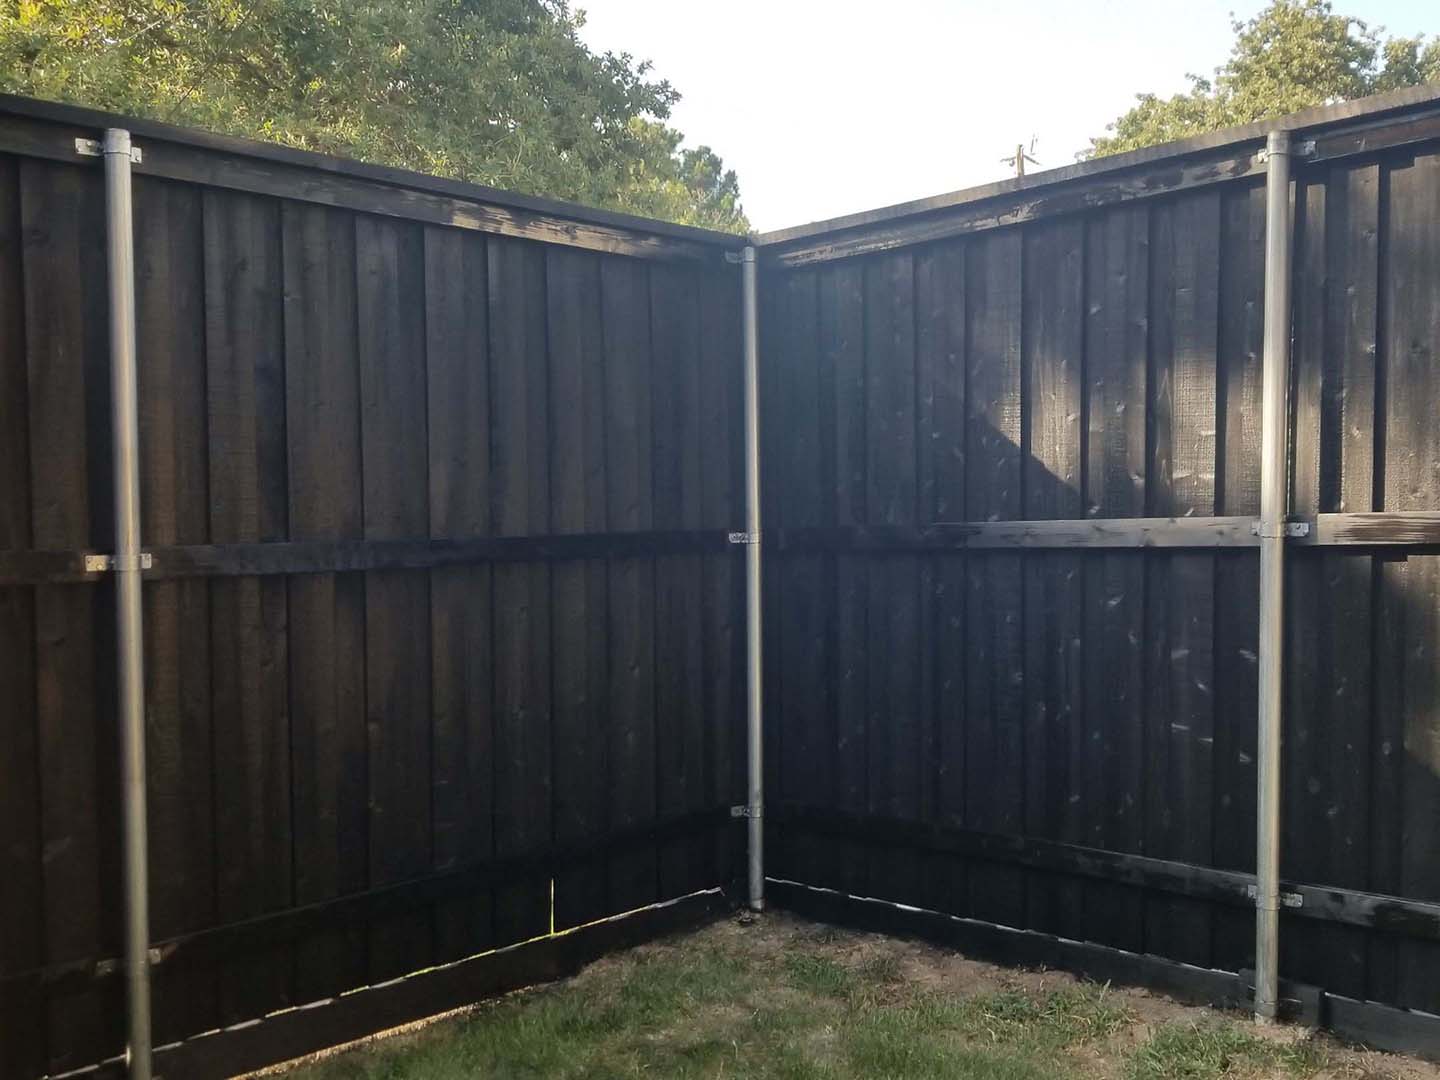 Manor TX cap and trim style wood fence